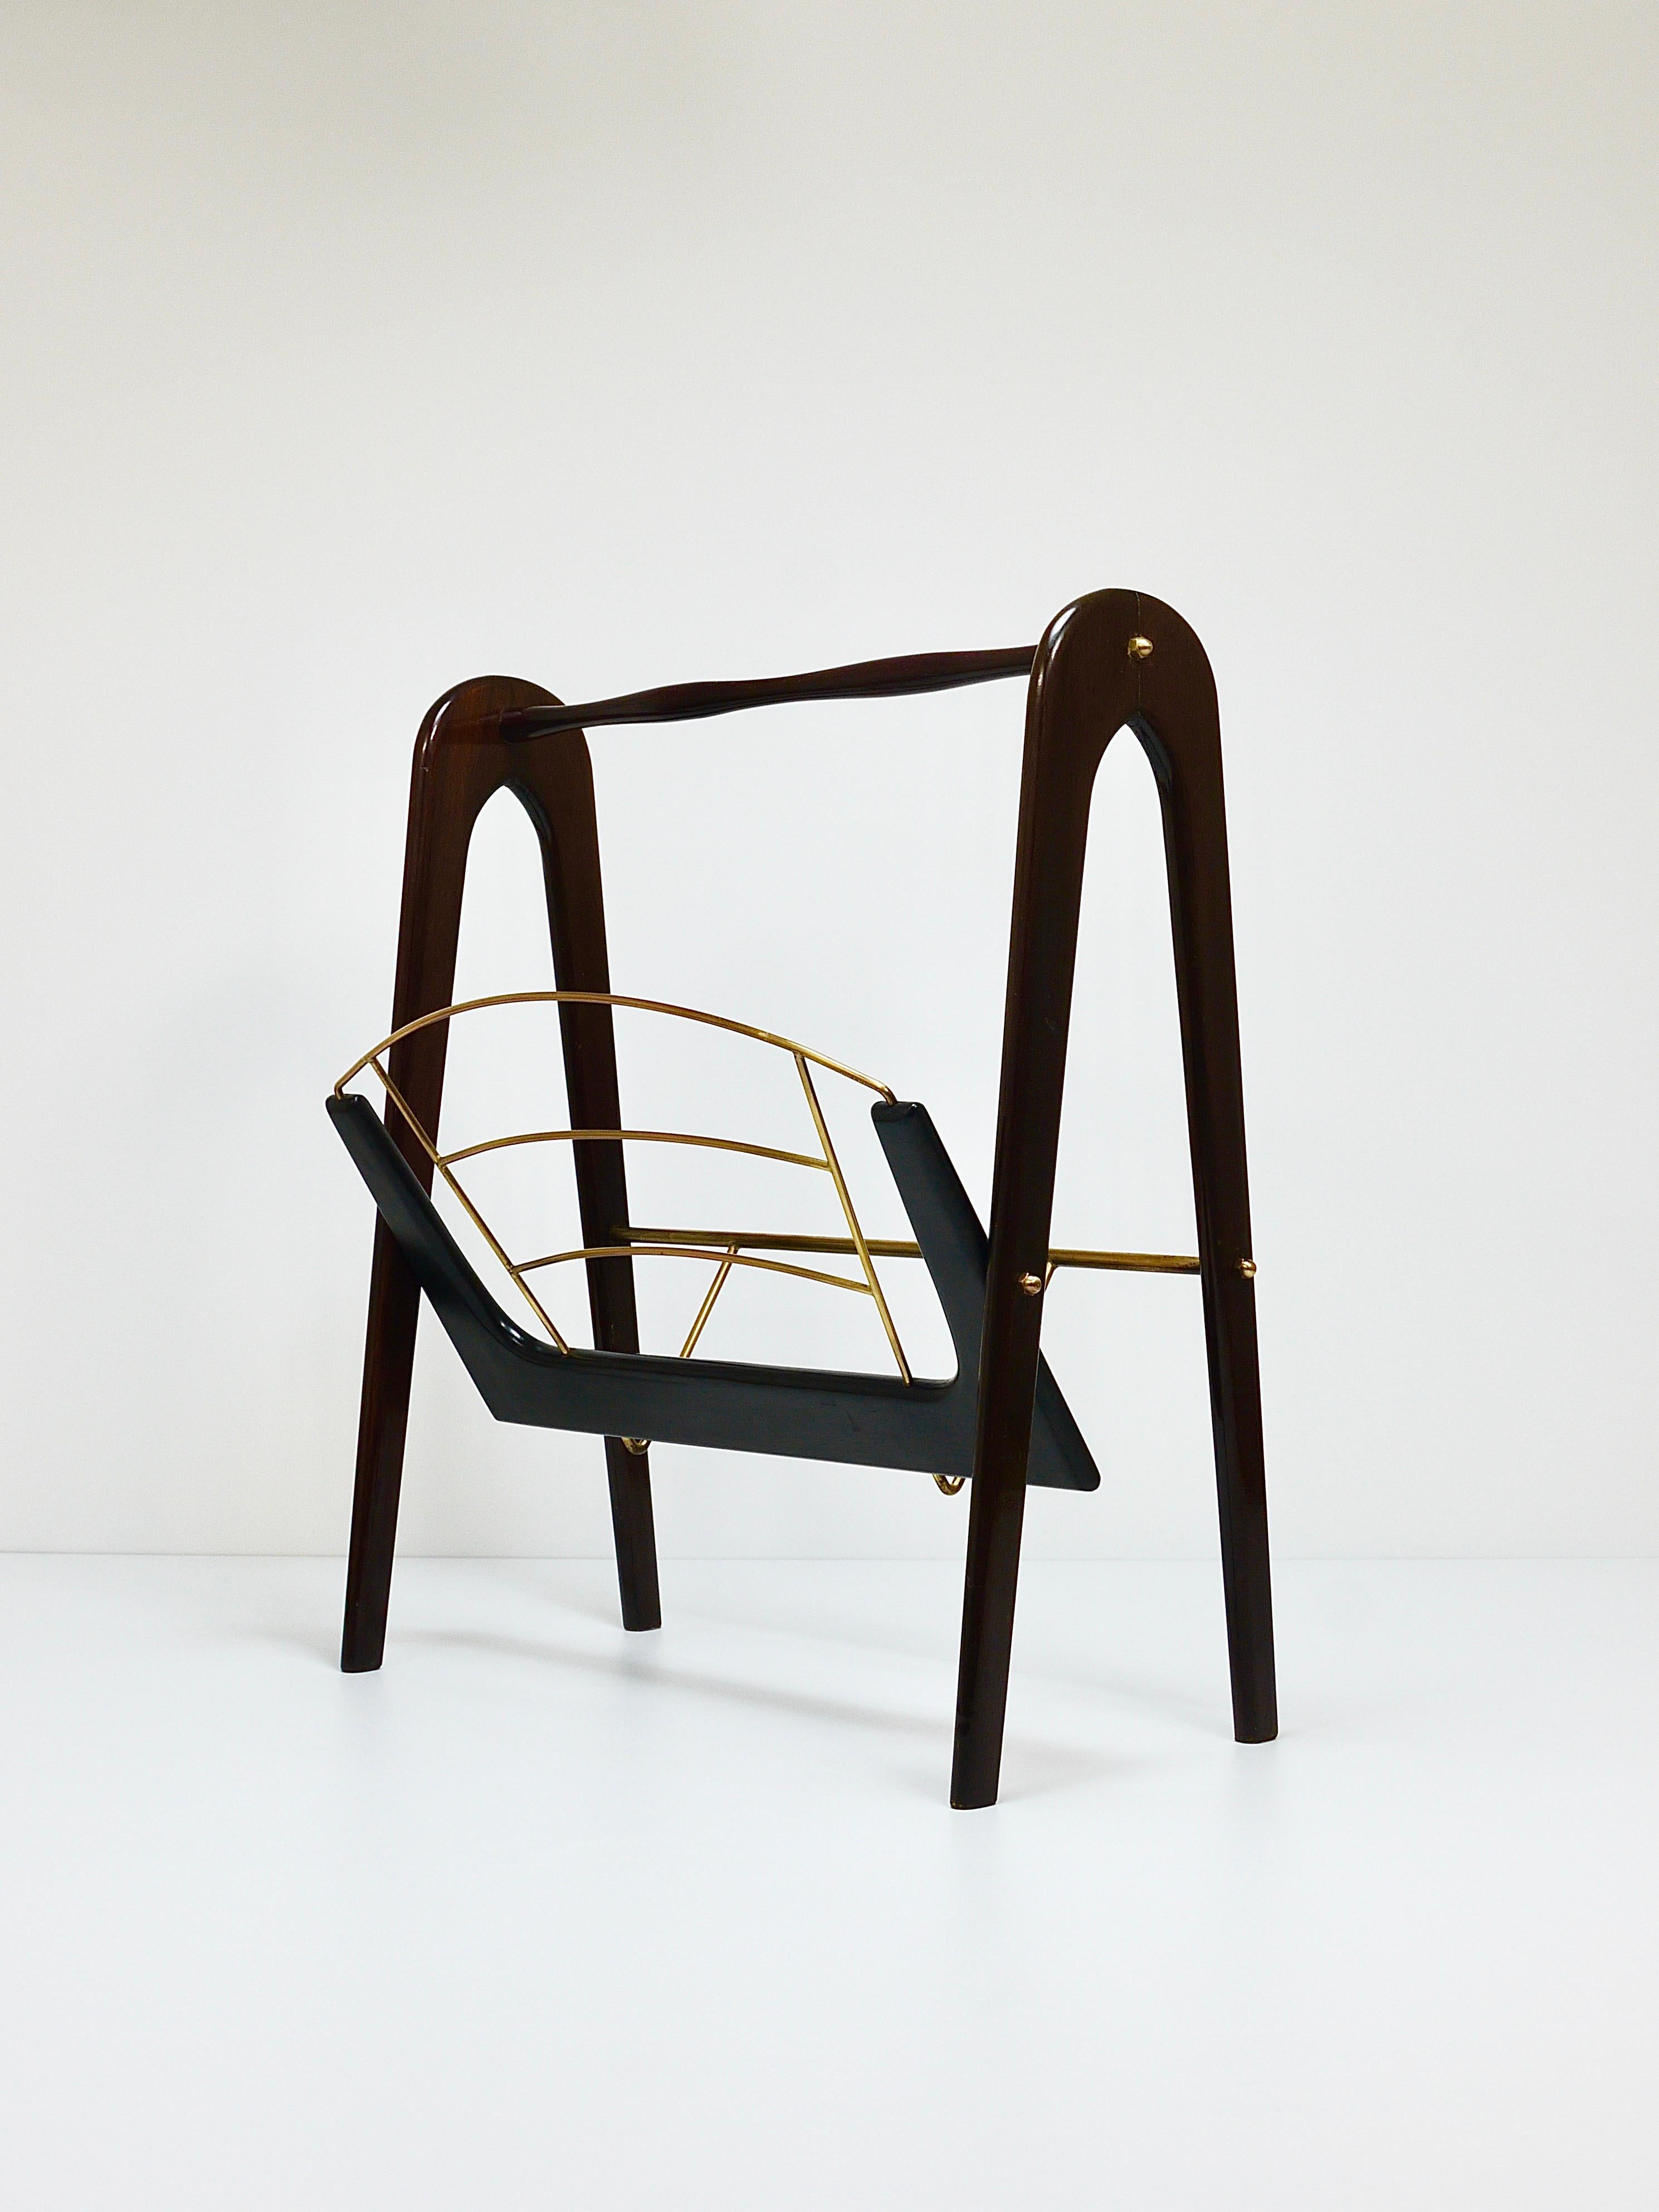 Polished Cesare Lacca Midcentury Magazine Rack, Mahogany & Brass, Italy, 1950s For Sale